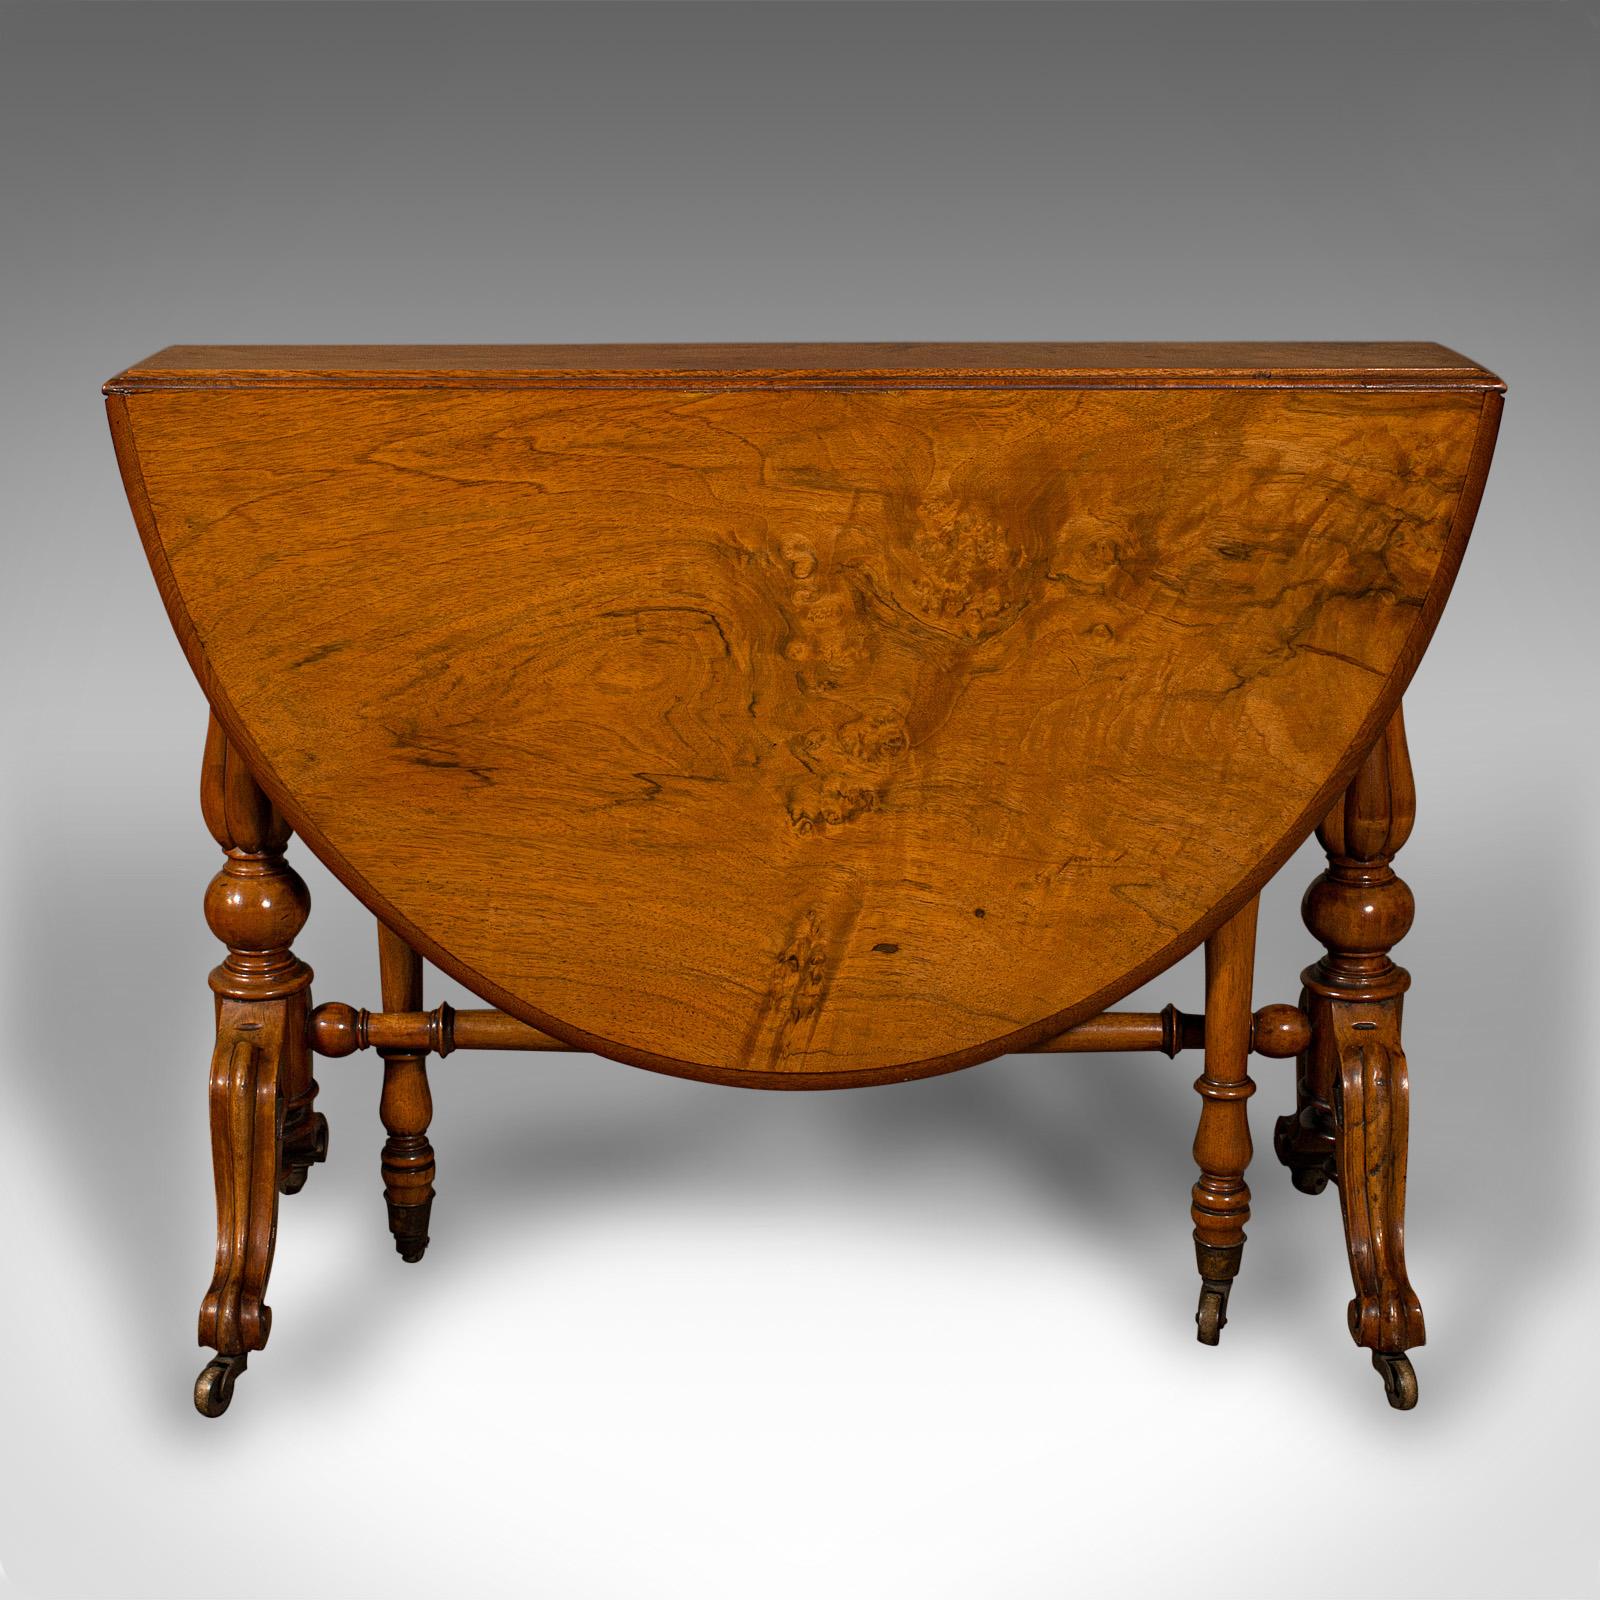 Antique Sutherland Table, English, Burr Walnut, Oval, Occasional, Victorian In Good Condition For Sale In Hele, Devon, GB